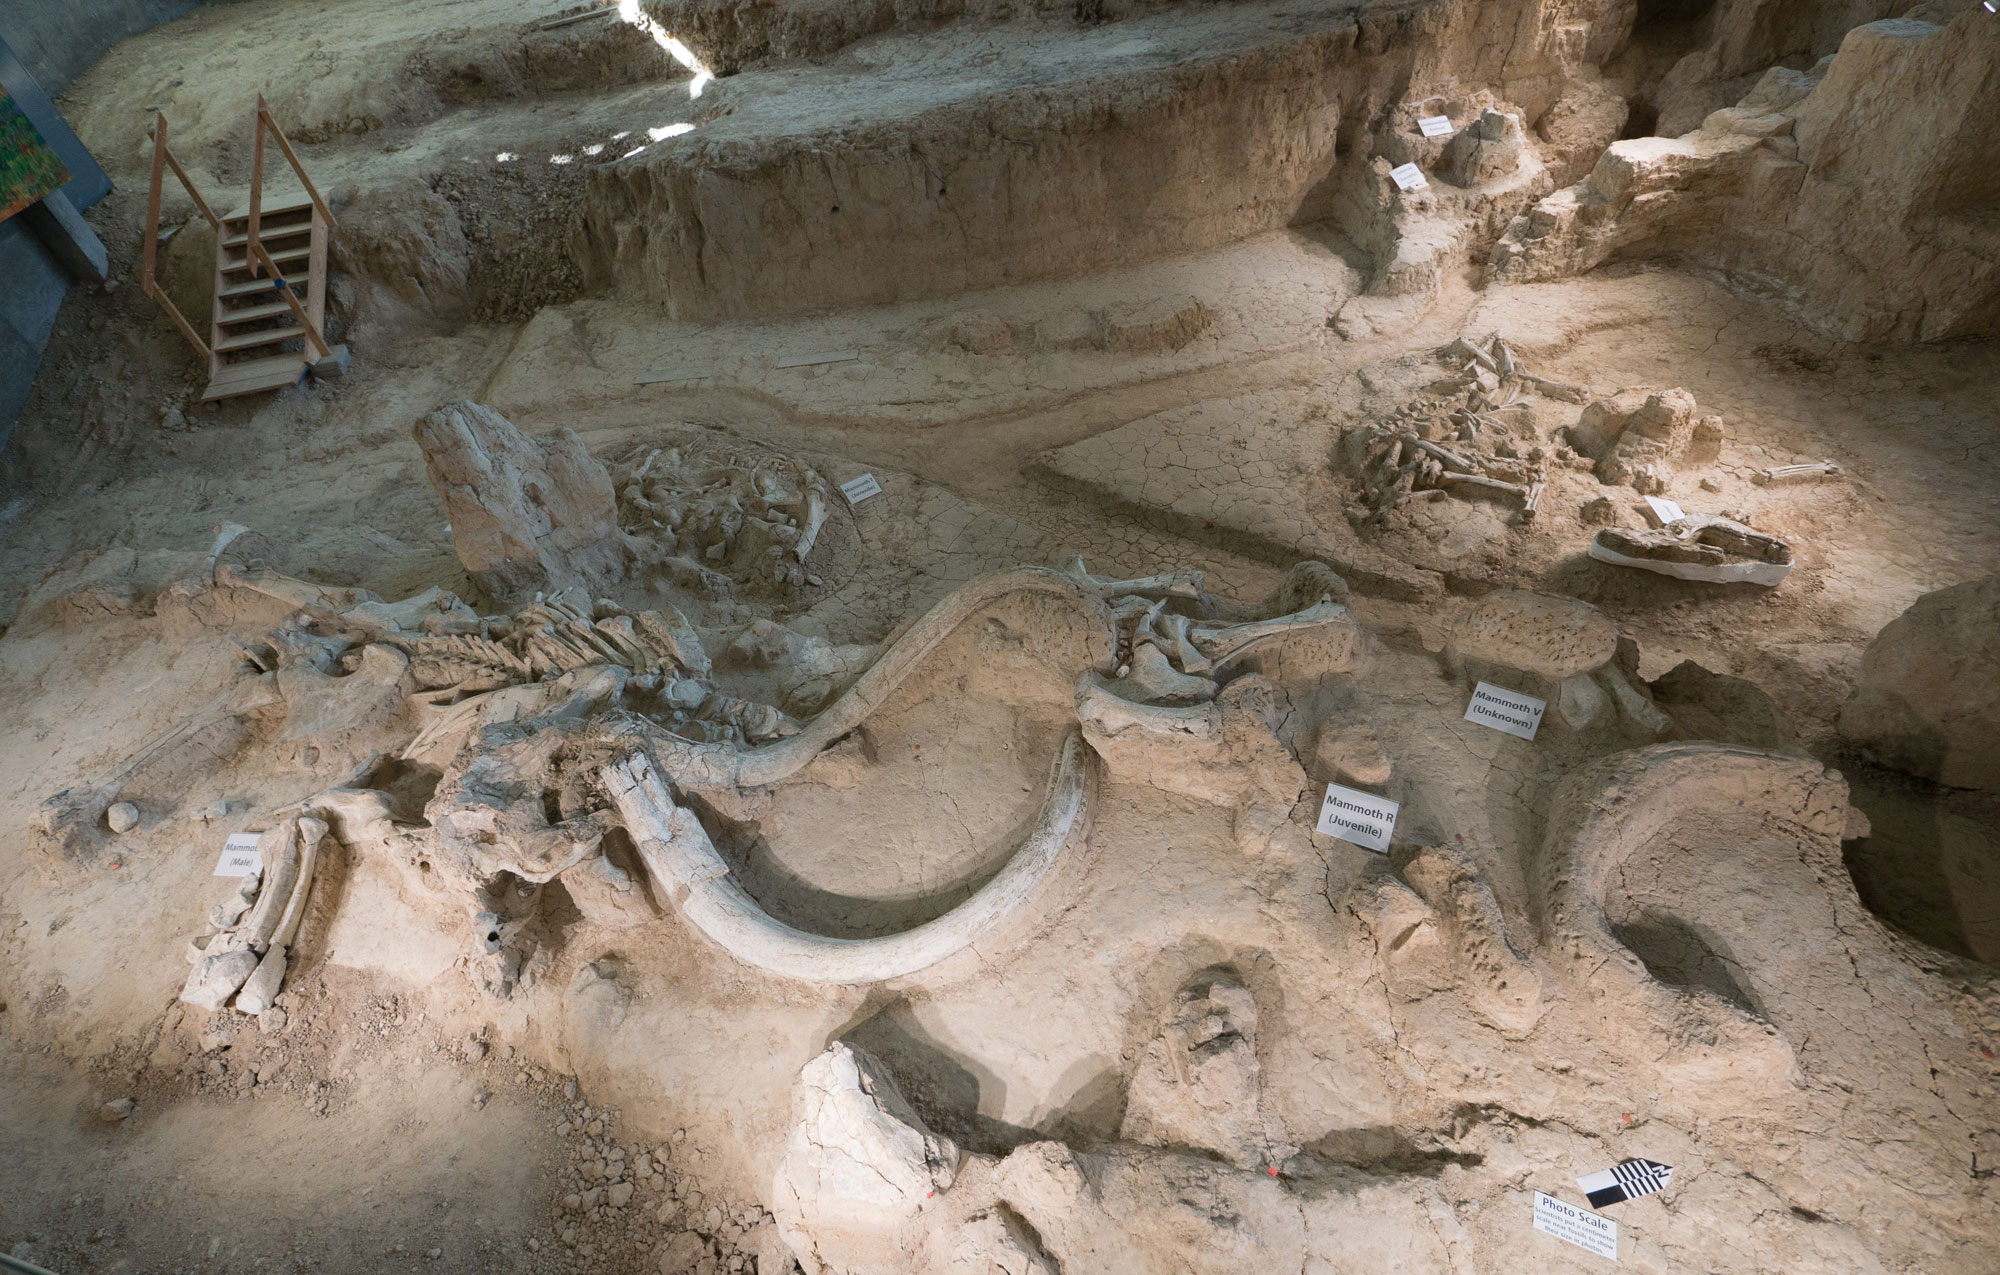 Photo showing partially excavated skeletons at Waco Mammoth National Monument, including multiple mammoths and a camel.